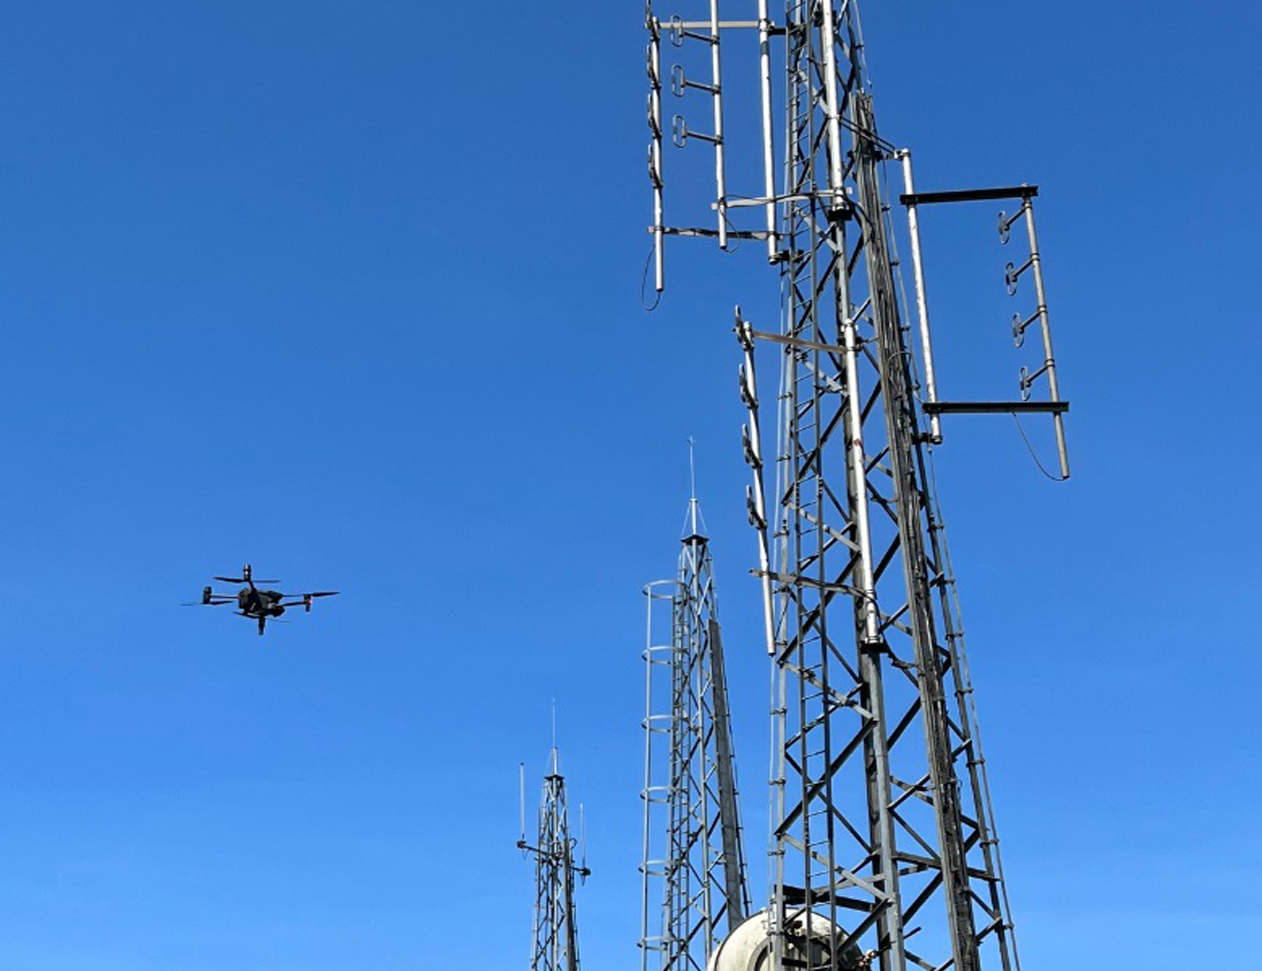 The smart signal tower inspection system consists of drones, AI engines, and remote monitoring devices.